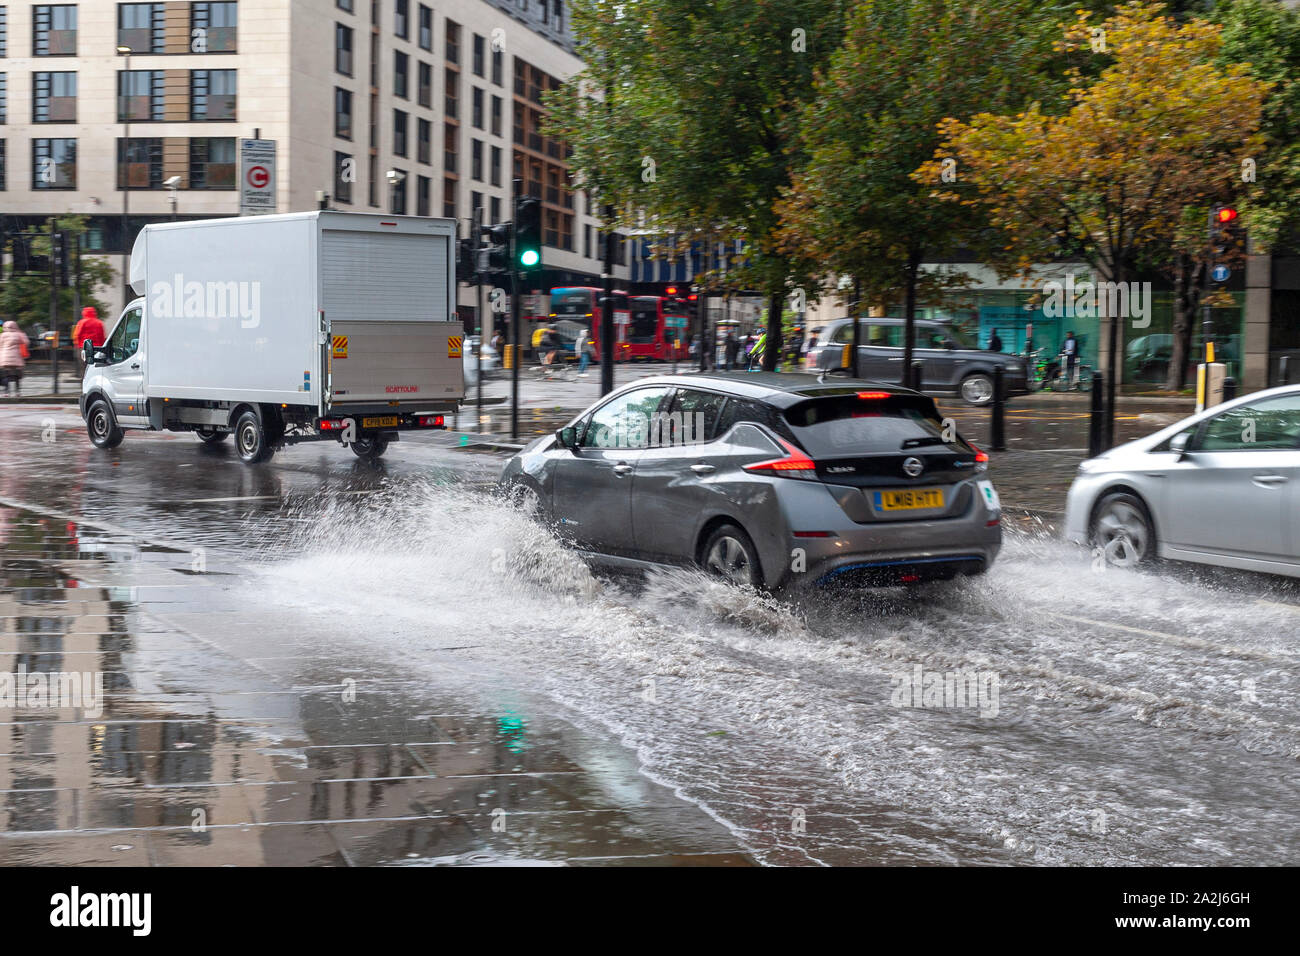 Heavy rain and flooding on roads at Tower Hill, London, UK October 2019 Stock Photo